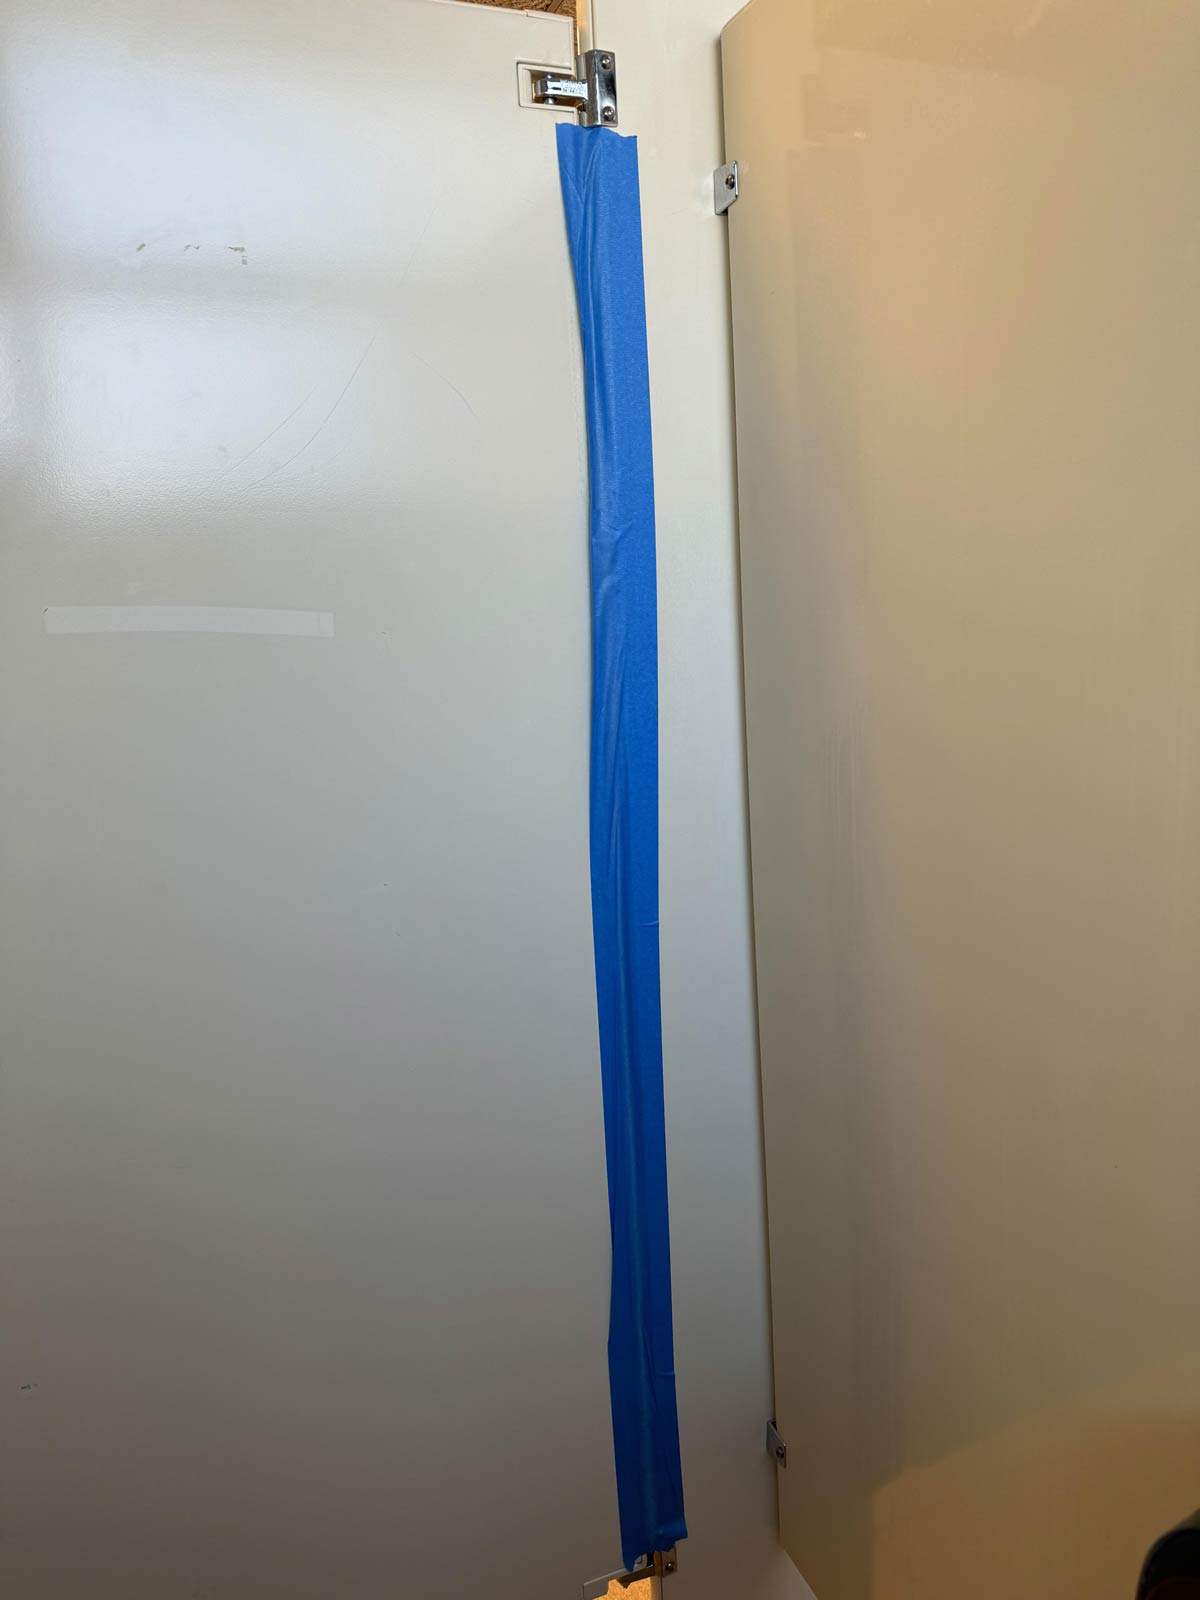 Someone in my office put painters tape in the bathroom stall so no one would see him pooping